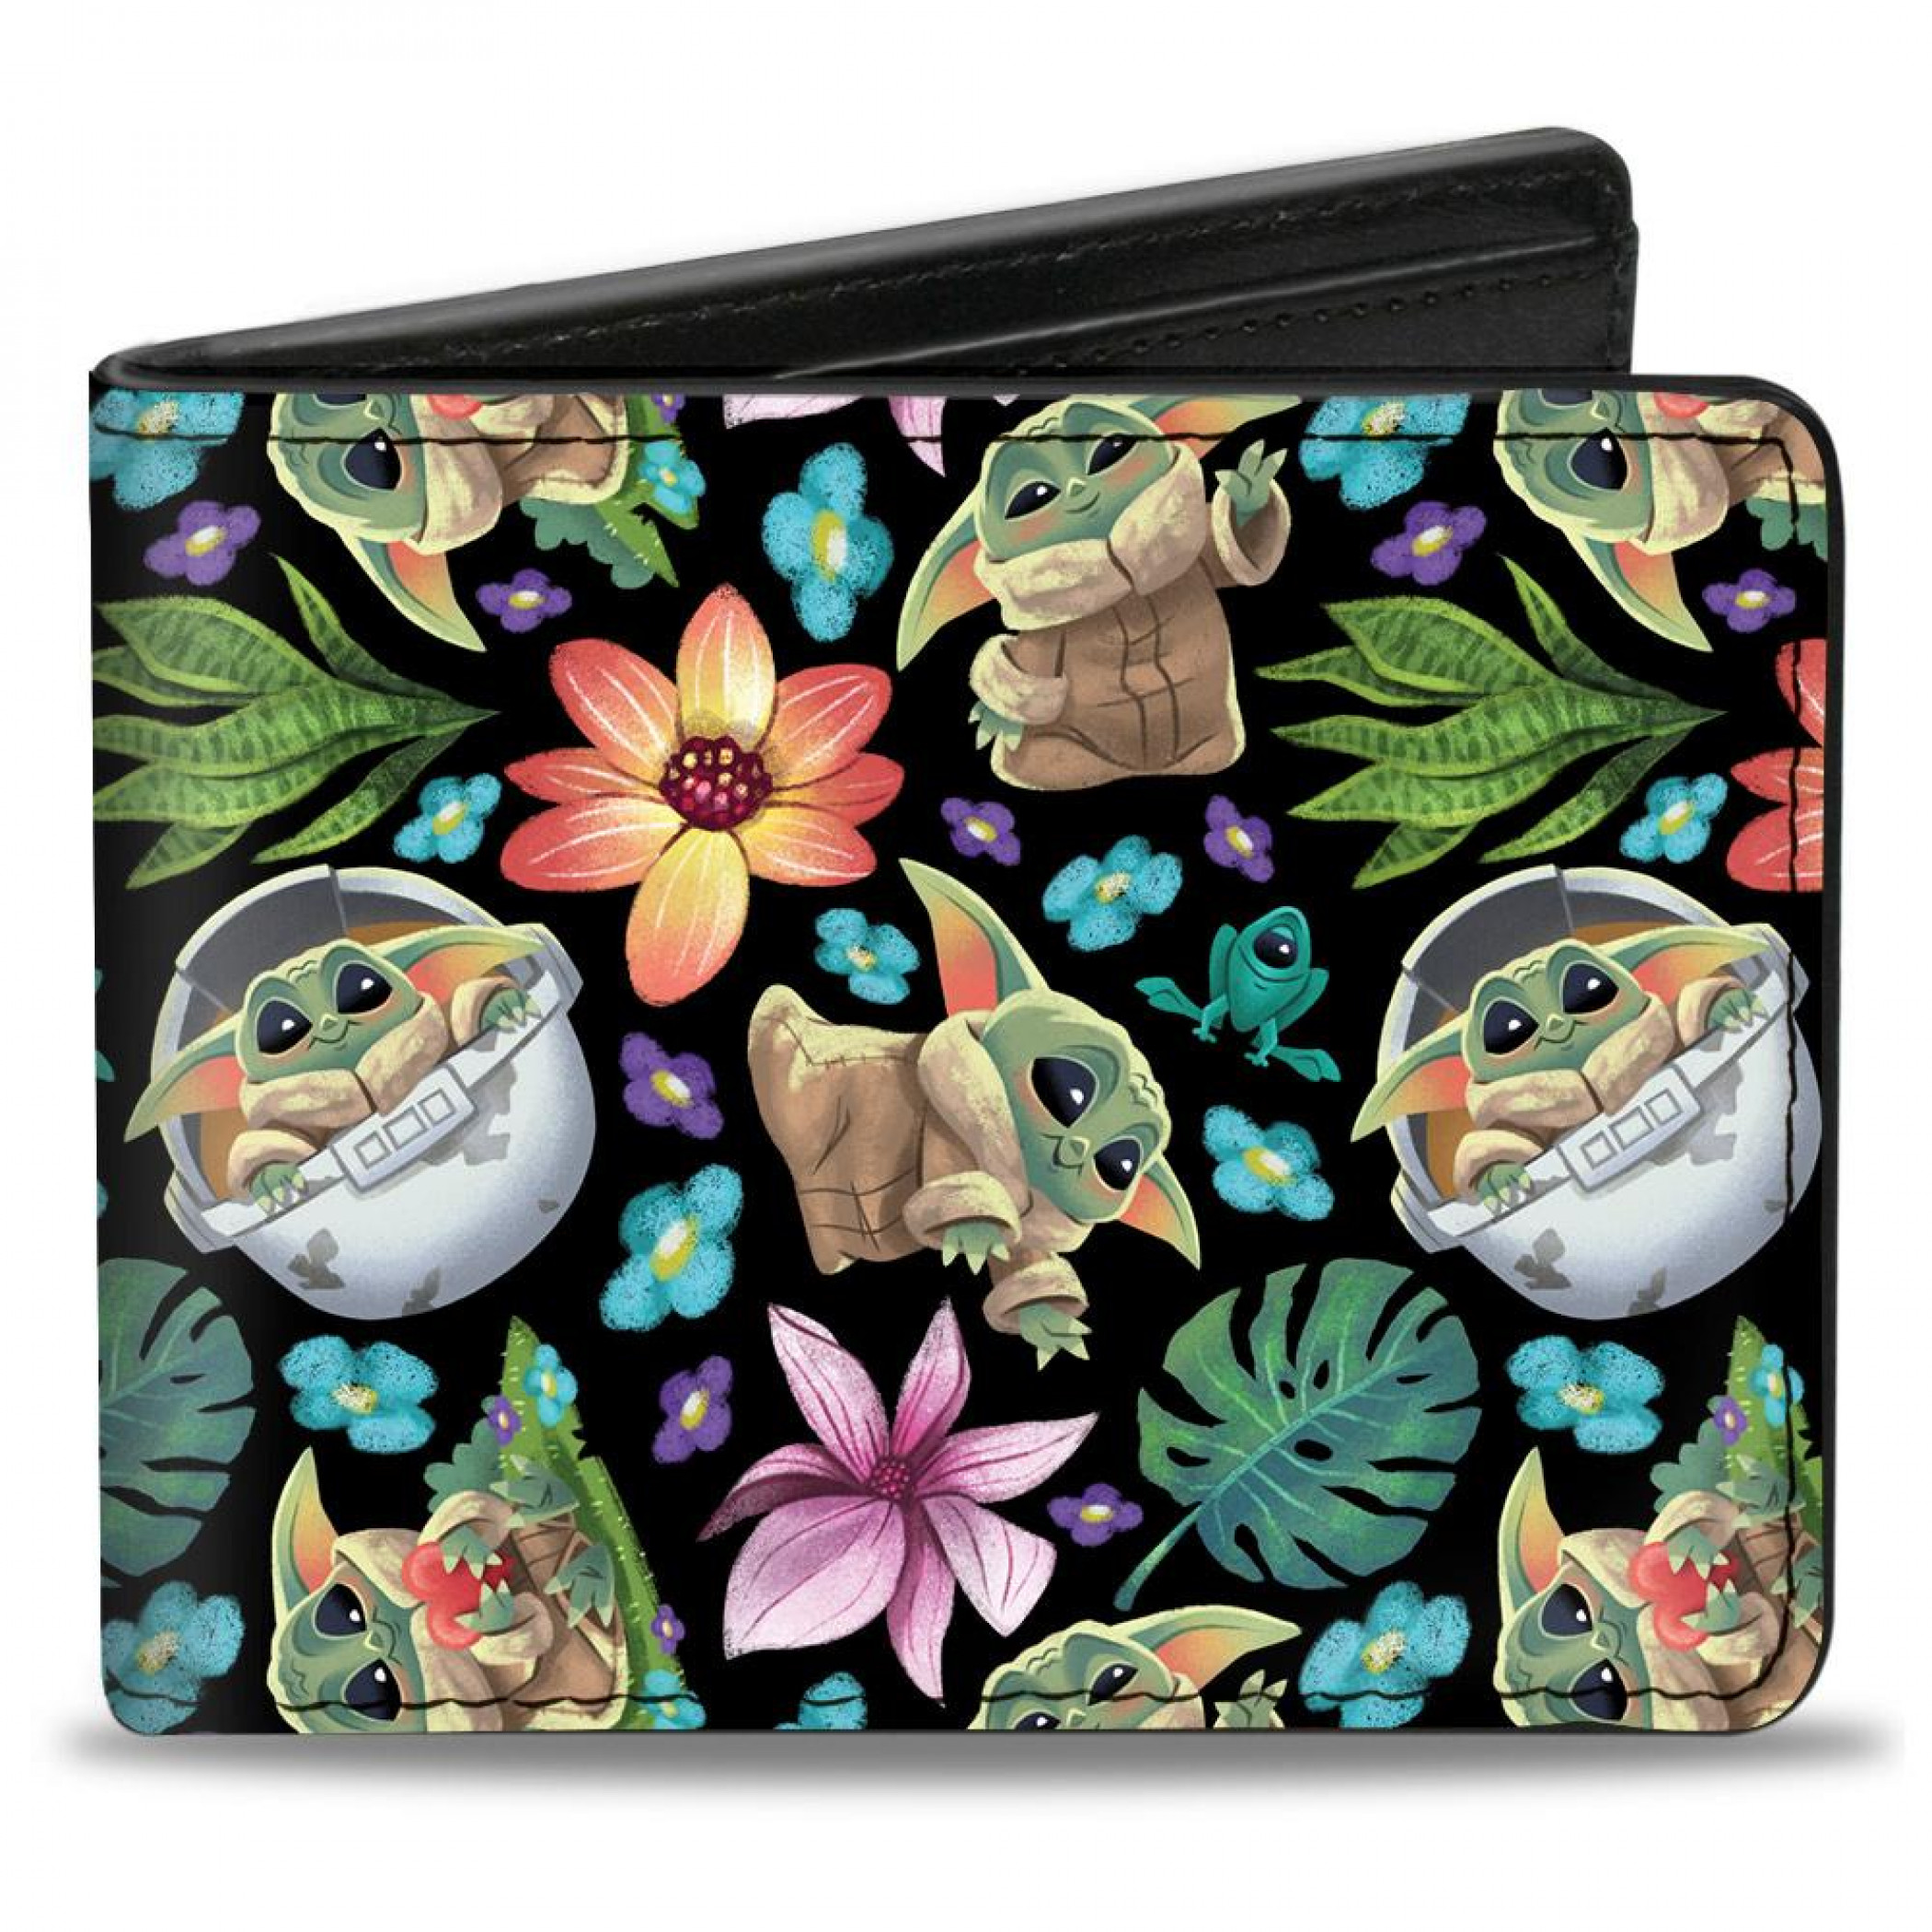 Star Wars The Child Grogu Poses and Floral Collage Wallet